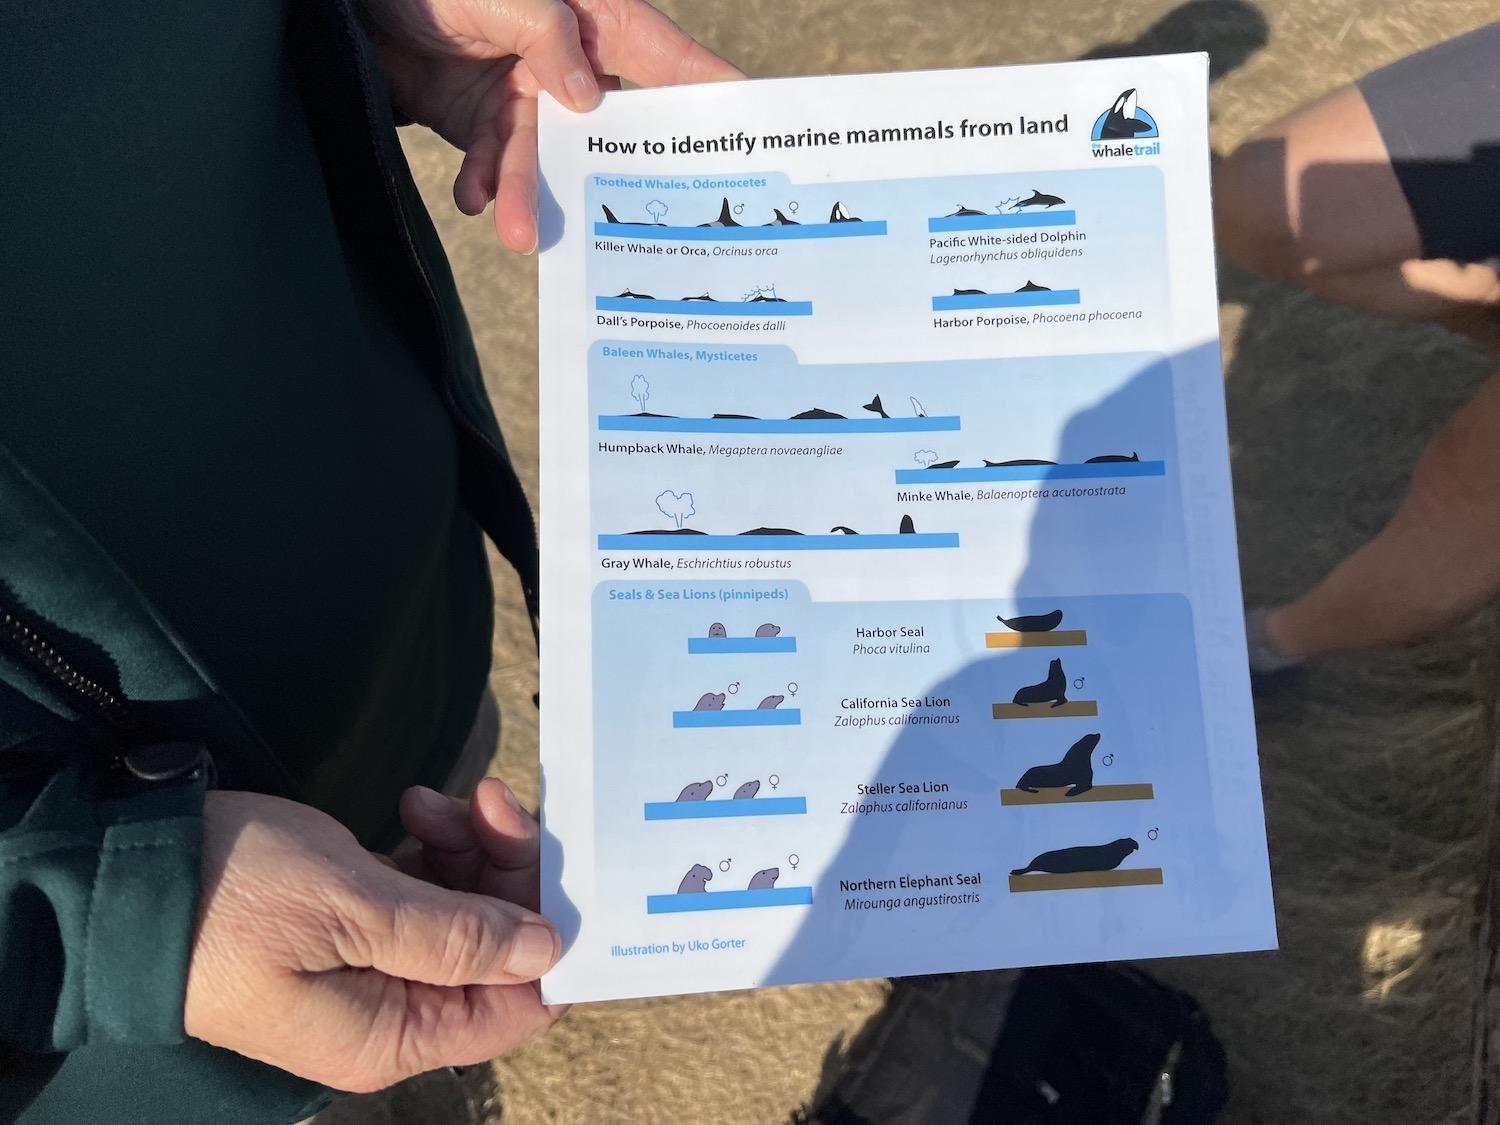 What to look for if you're on shore looking for whales and other marine mammals.